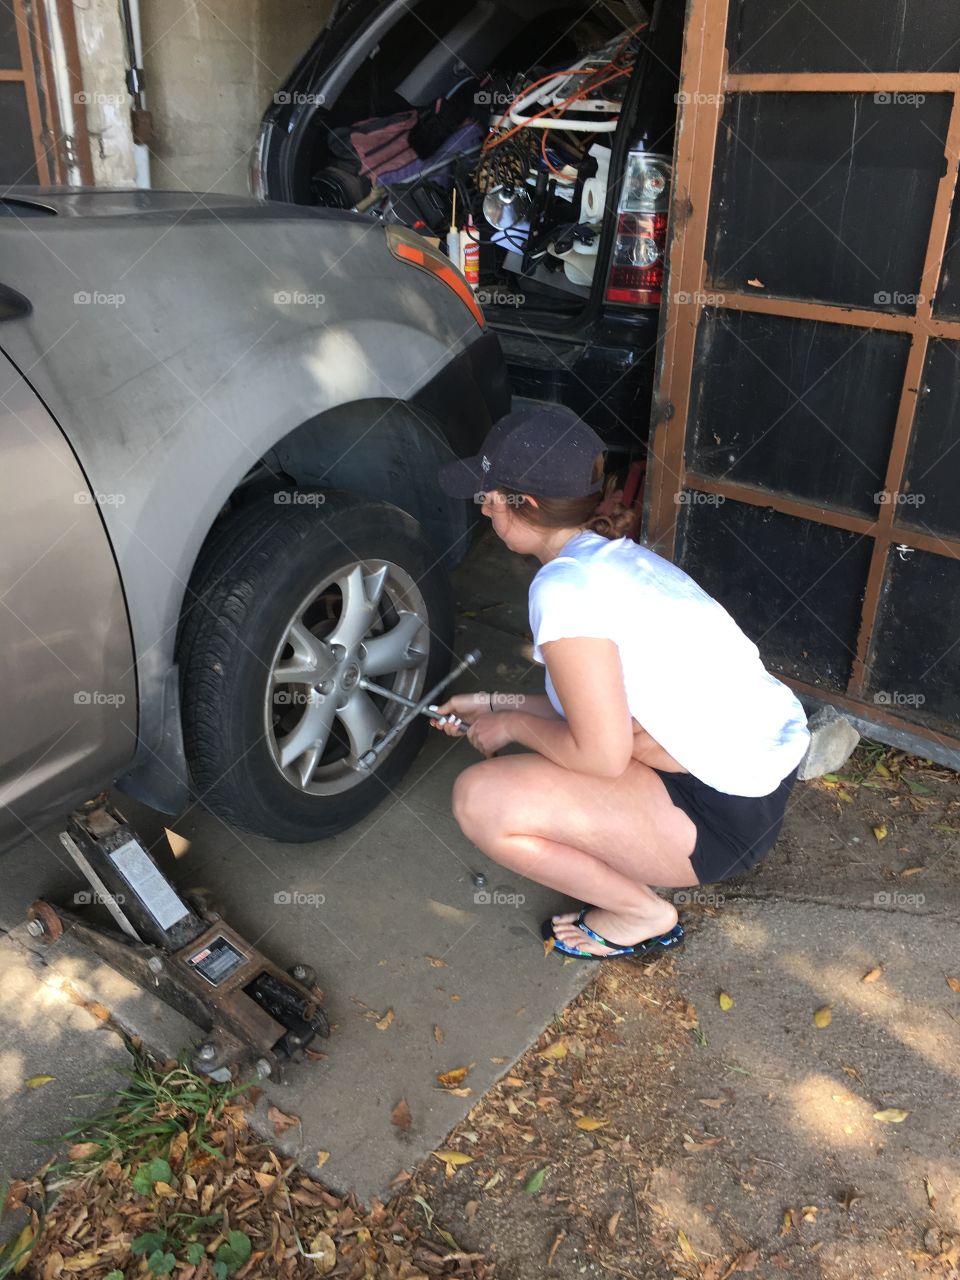 Working on her car